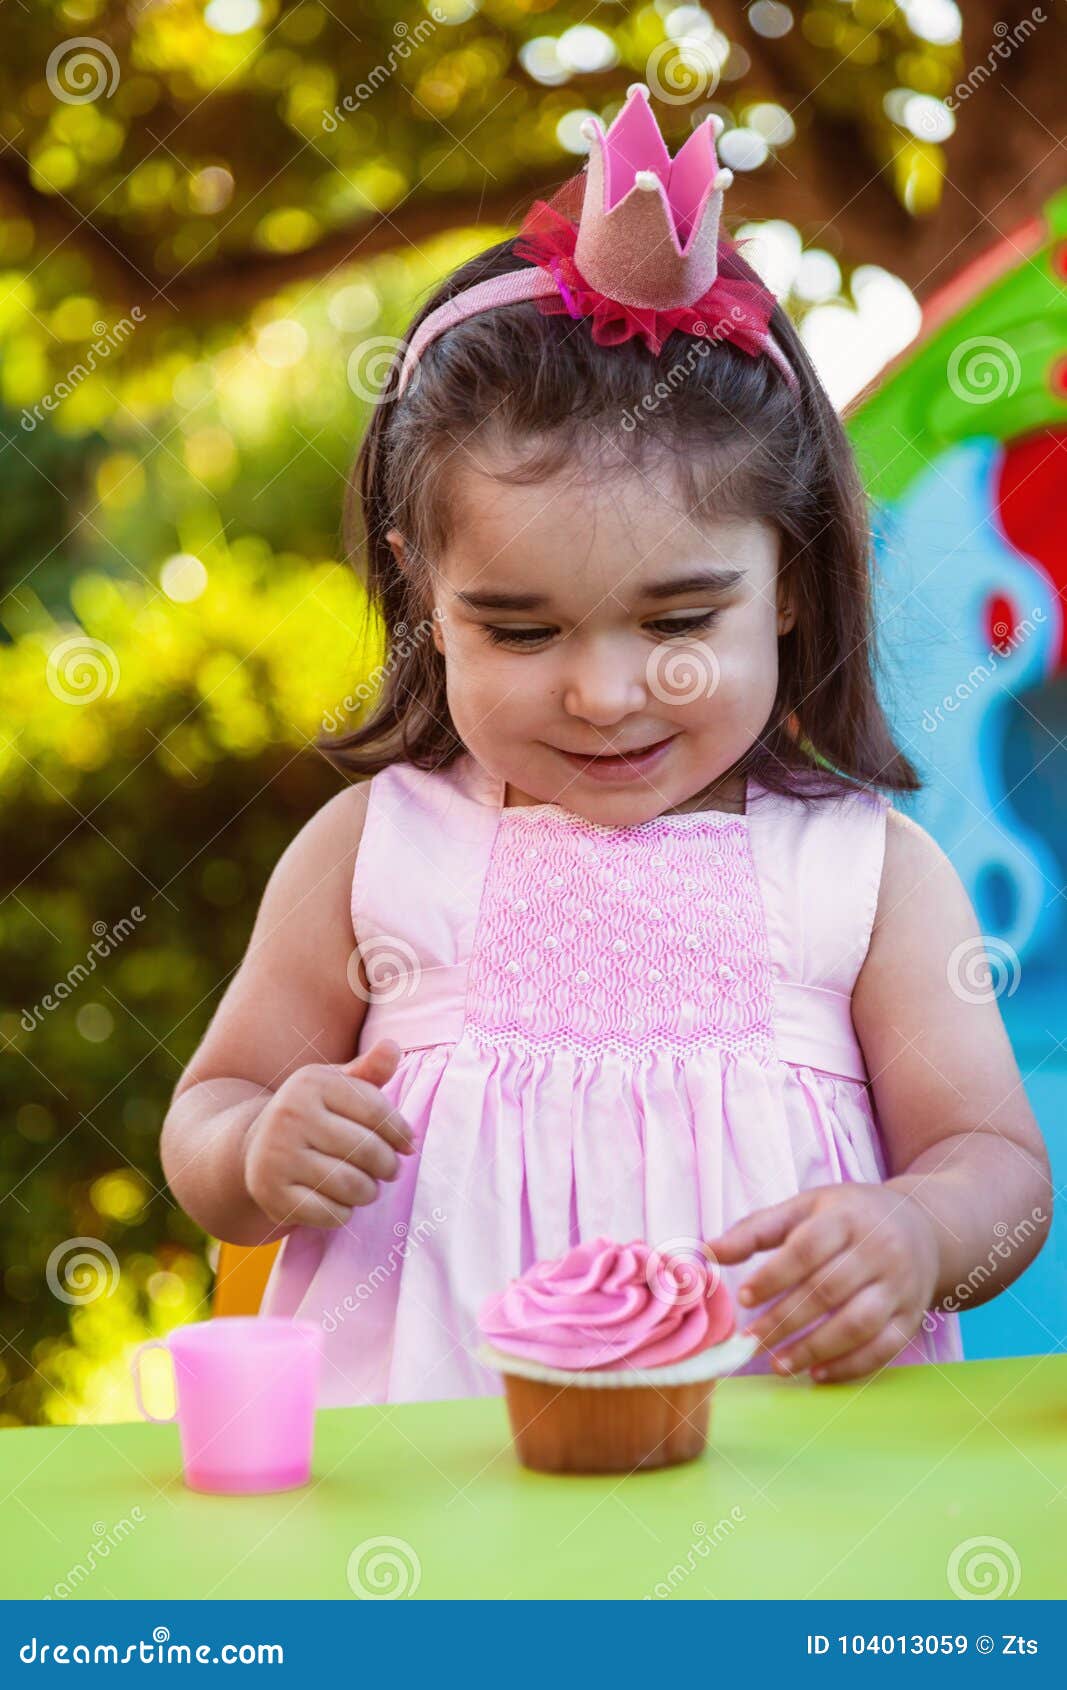 baby toddler girl in outdoor party at garden, happy and smiling at cupcake with sweet tooth expression